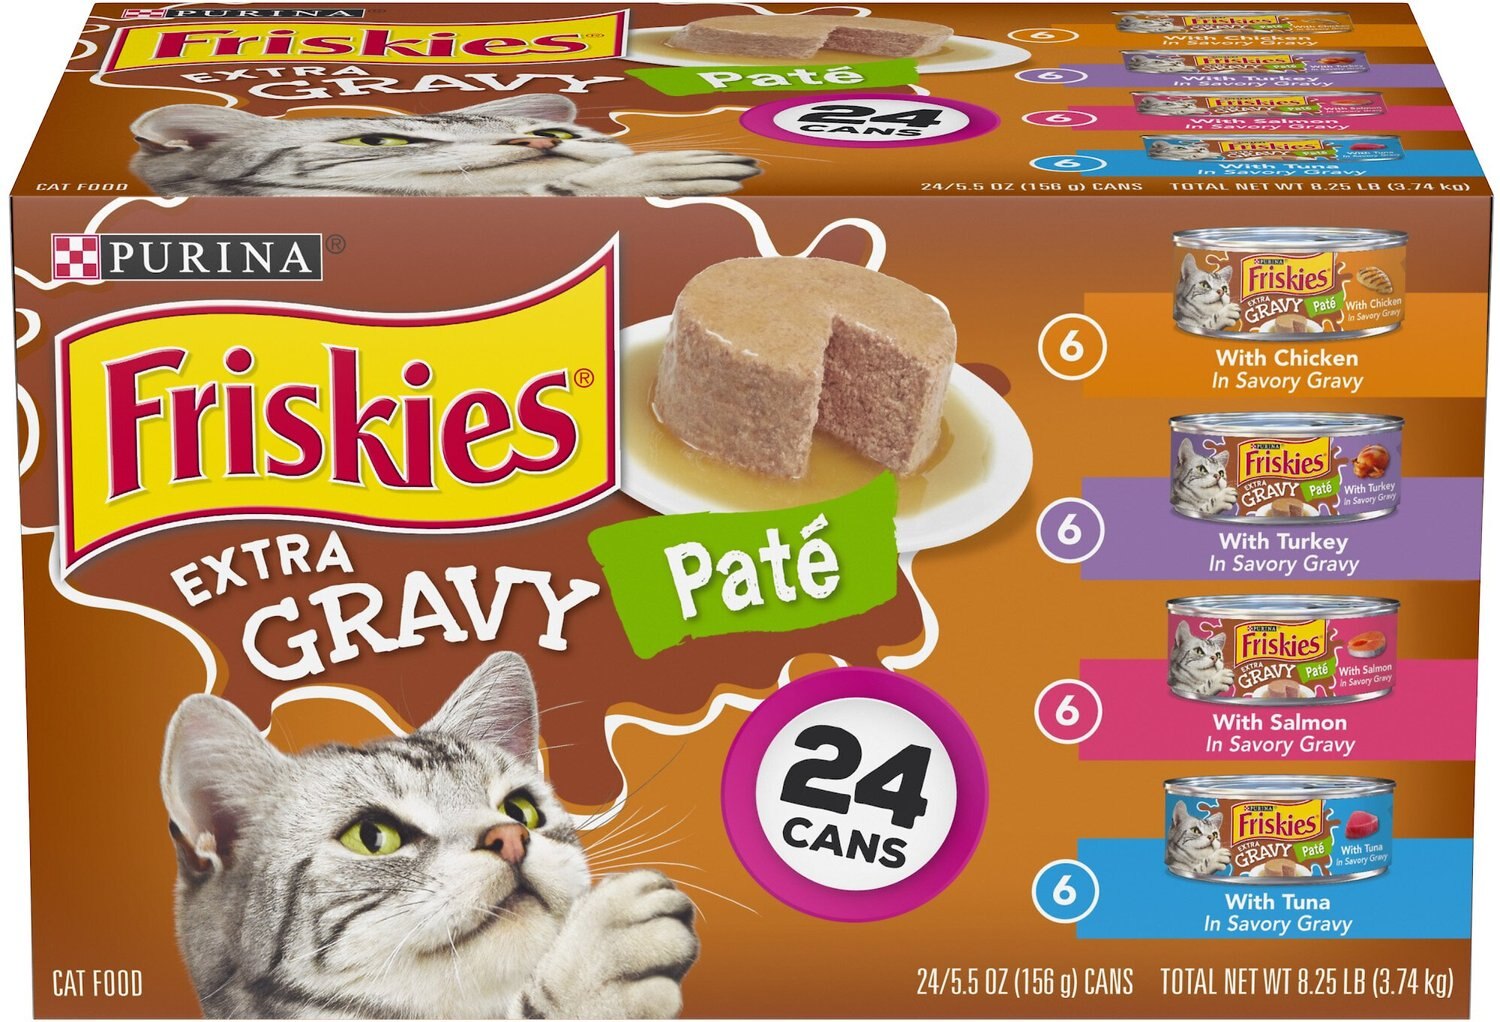 FRISKIES Extra Gravy Pate Variety Pack Canned Cat Food, 5.5oz, case of